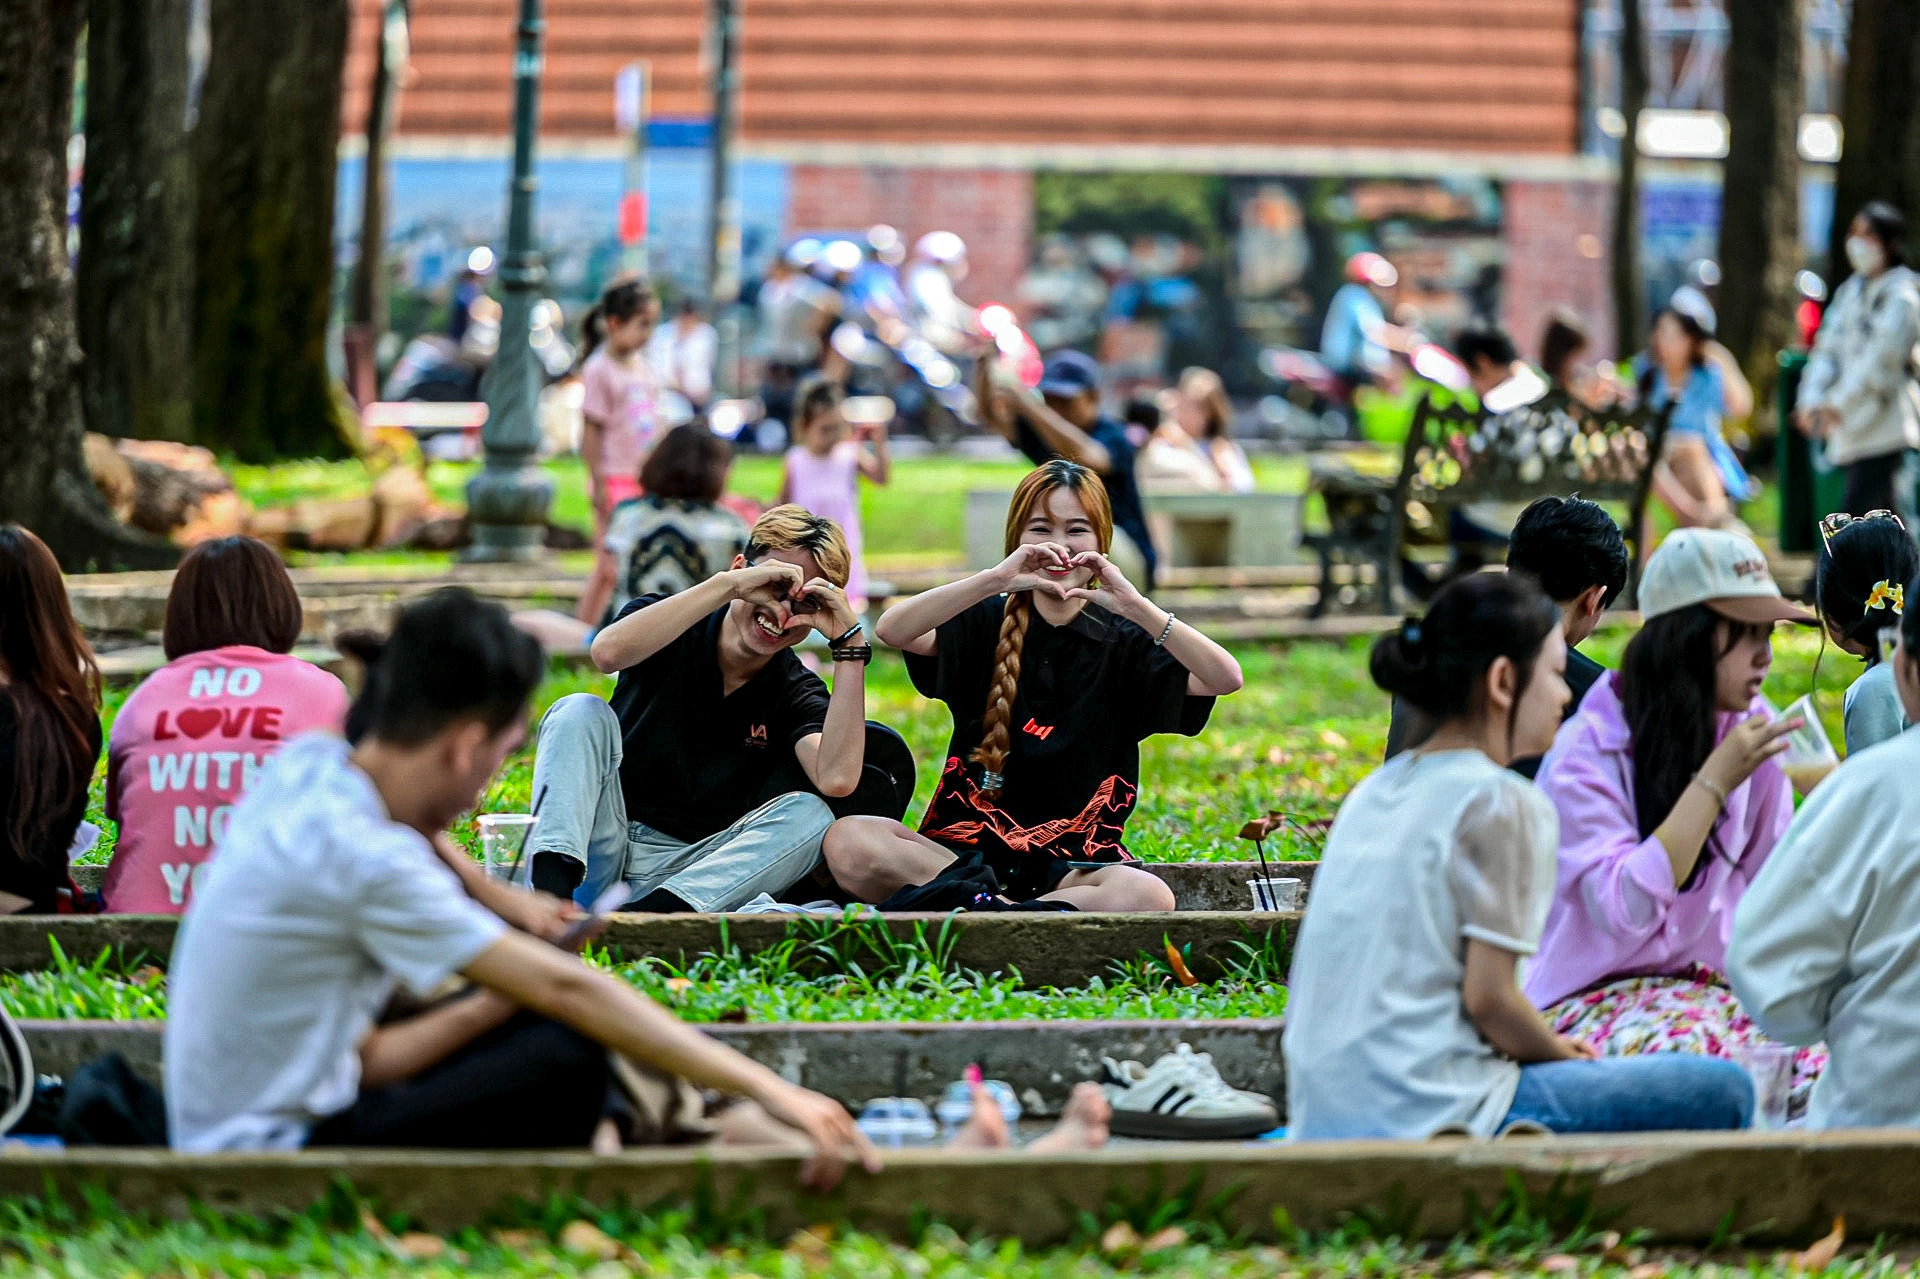 With its giant shady trees and cool air, the April 30 Park is favored by young people and tourists who gather to take photos, enjoy street coffee, relax and chat under the trees on hot days. Photo: Phuong Quyen / Tuoi Tre